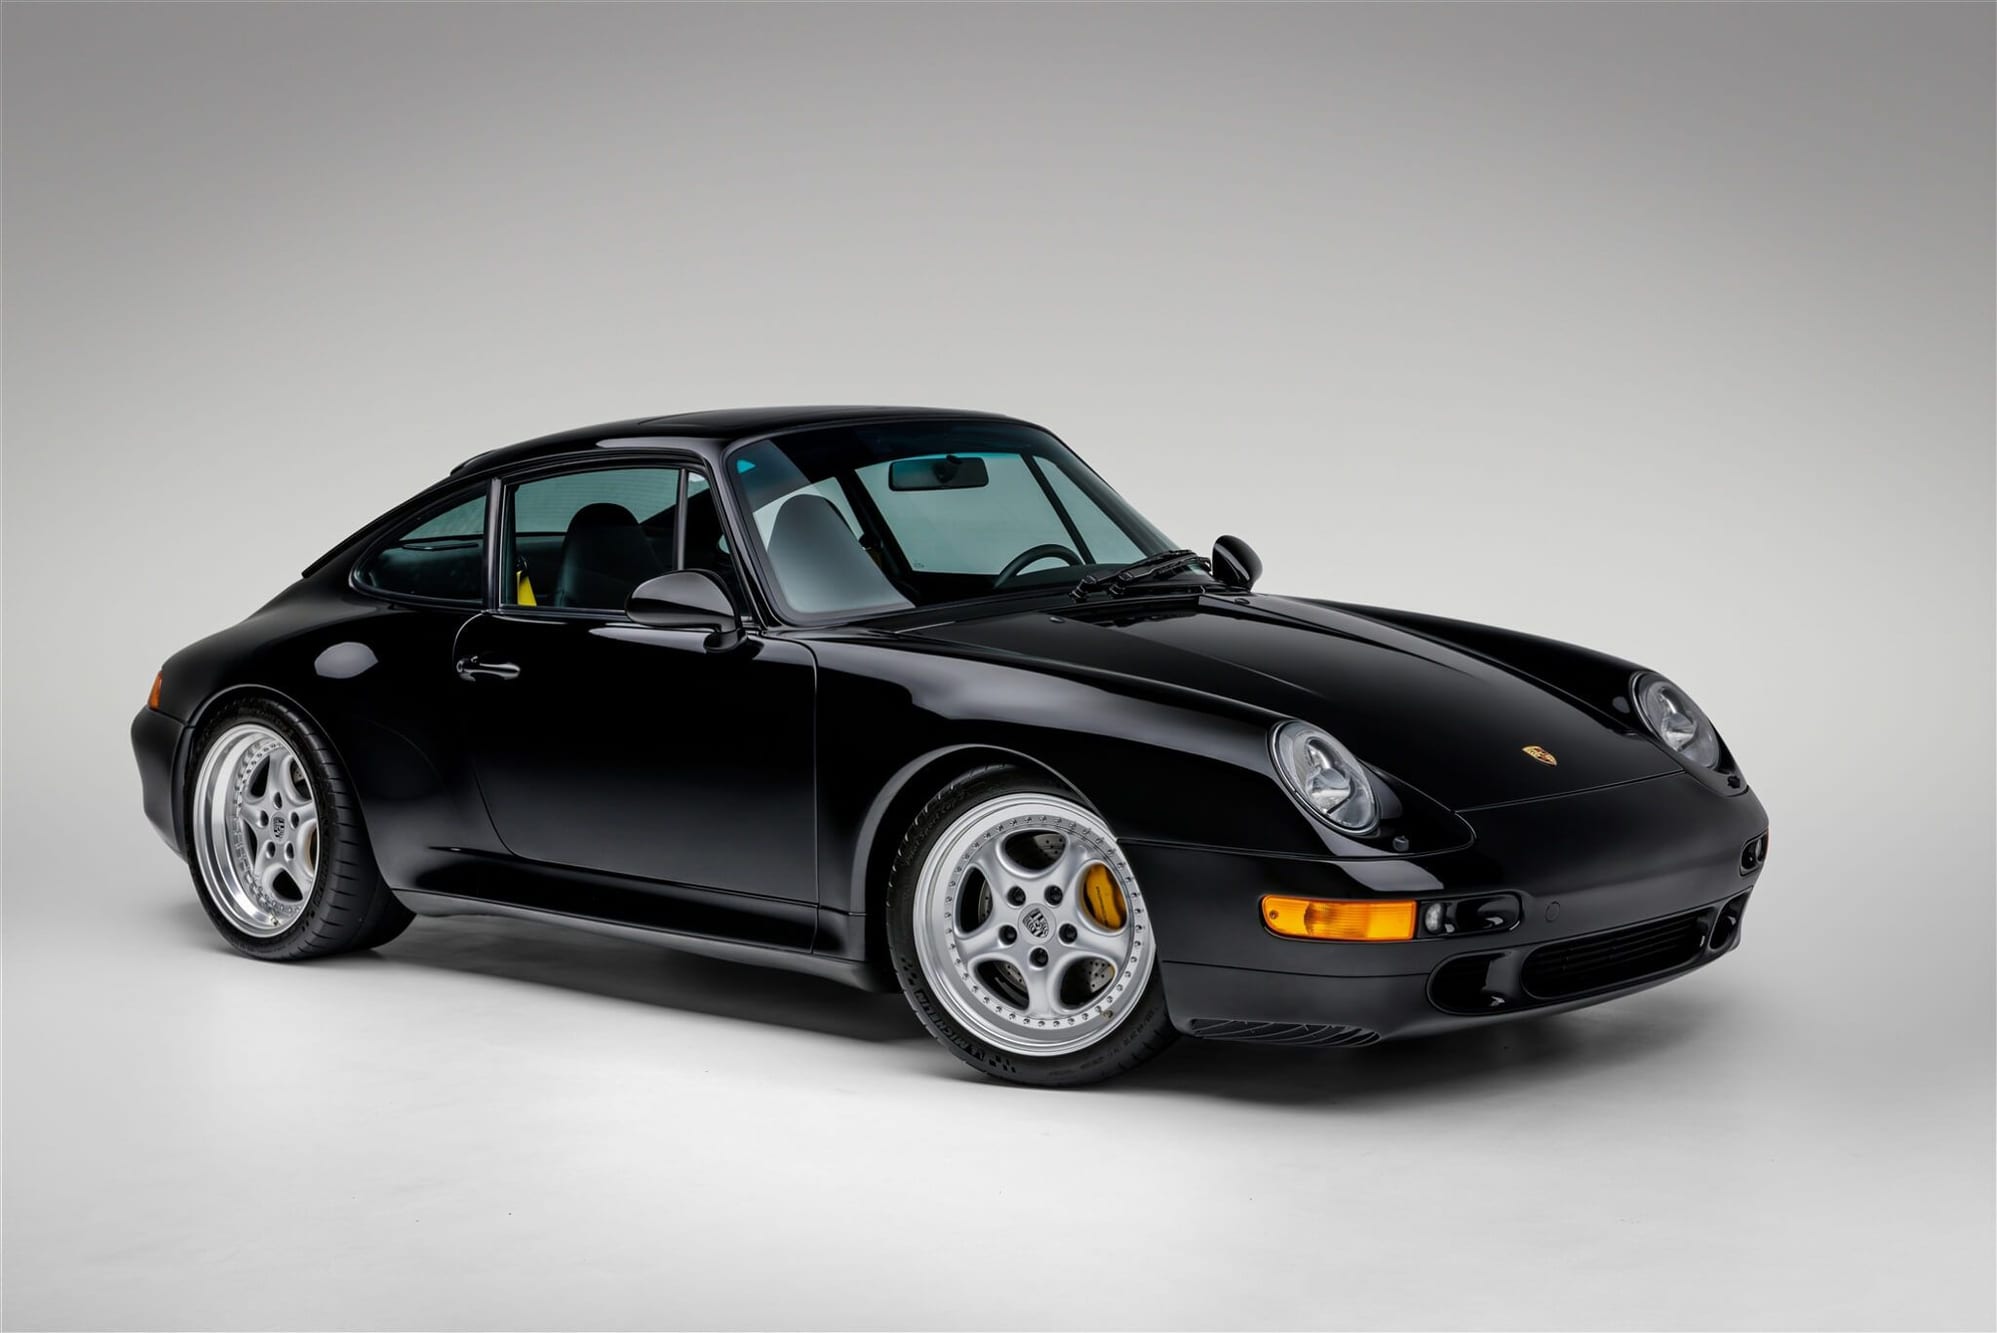 1997 Porsche 911 - 1997 Porsche 993 C2S 4.0L Rothsport Rstrada Build - Used - VIN WP0AA2991VS322611 - 71,000 Miles - 6 cyl - 2WD - Manual - Coupe - Black - Twinsburg, OH 44087, United States